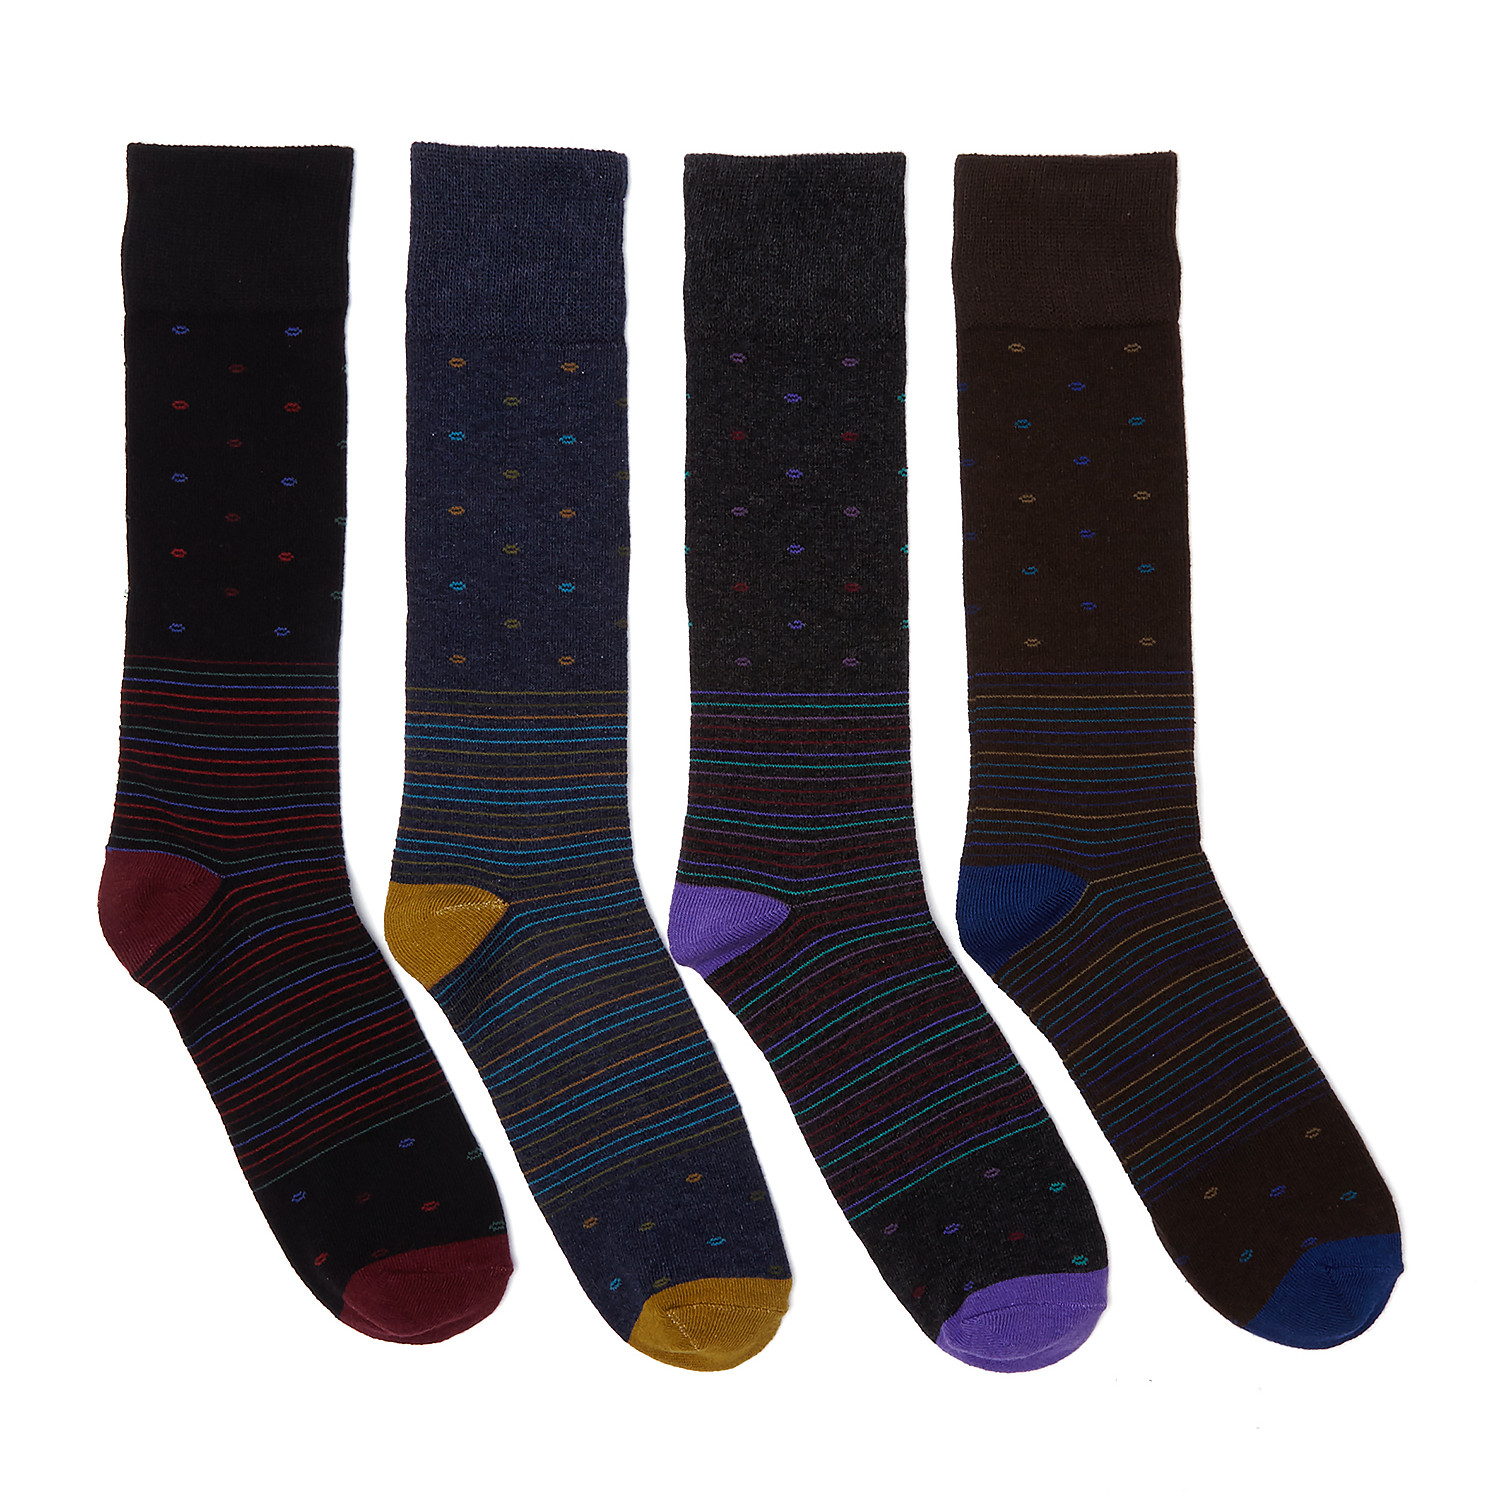 Ikat The Normal Socks // Pack of 4 - Stacy Adams - Touch of Modern